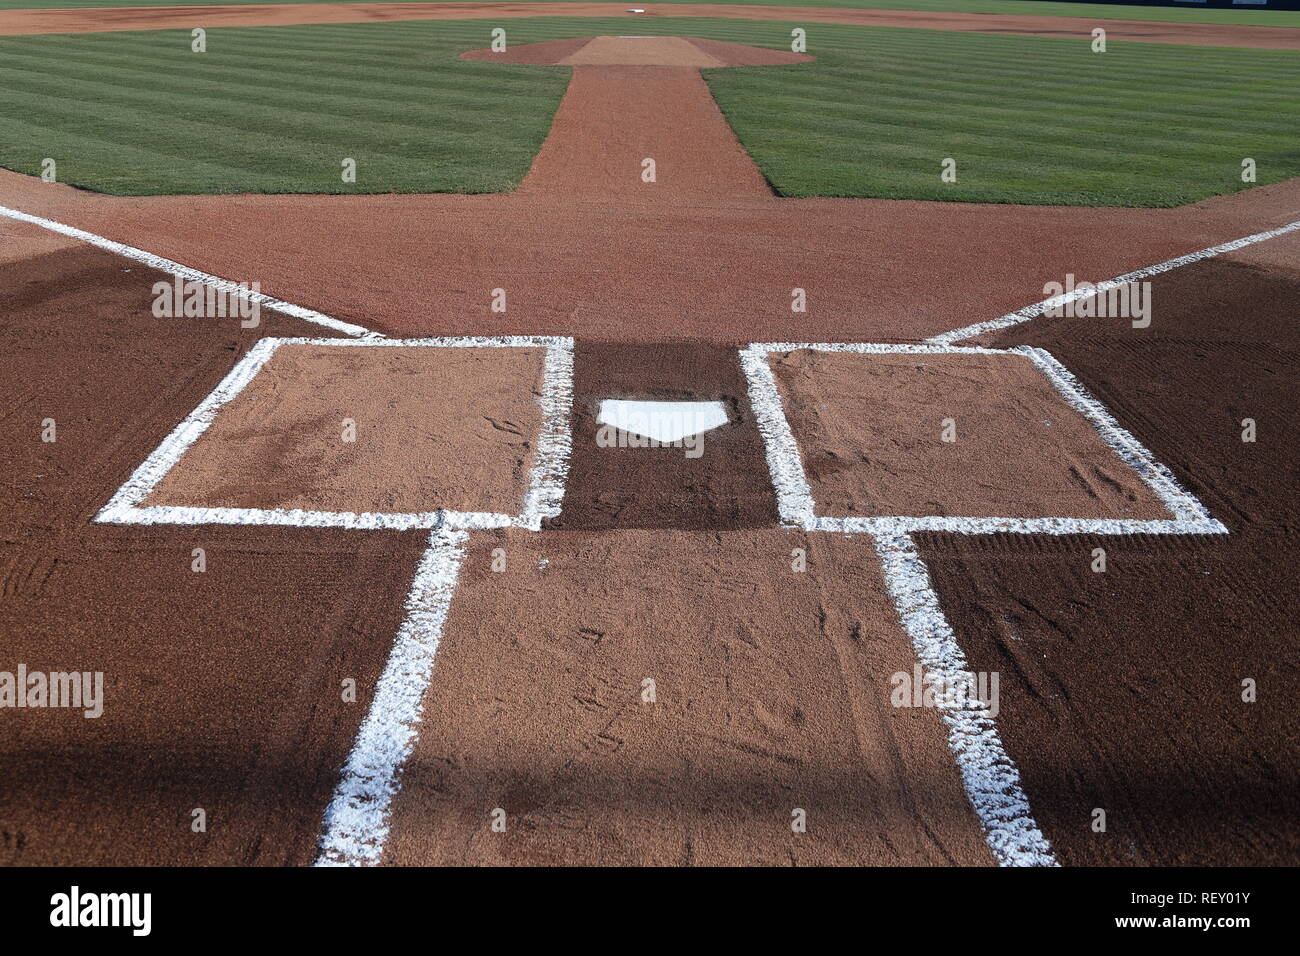 Baseball Home Plate batters box with fresh chalk lines Stock Photo - Alamy